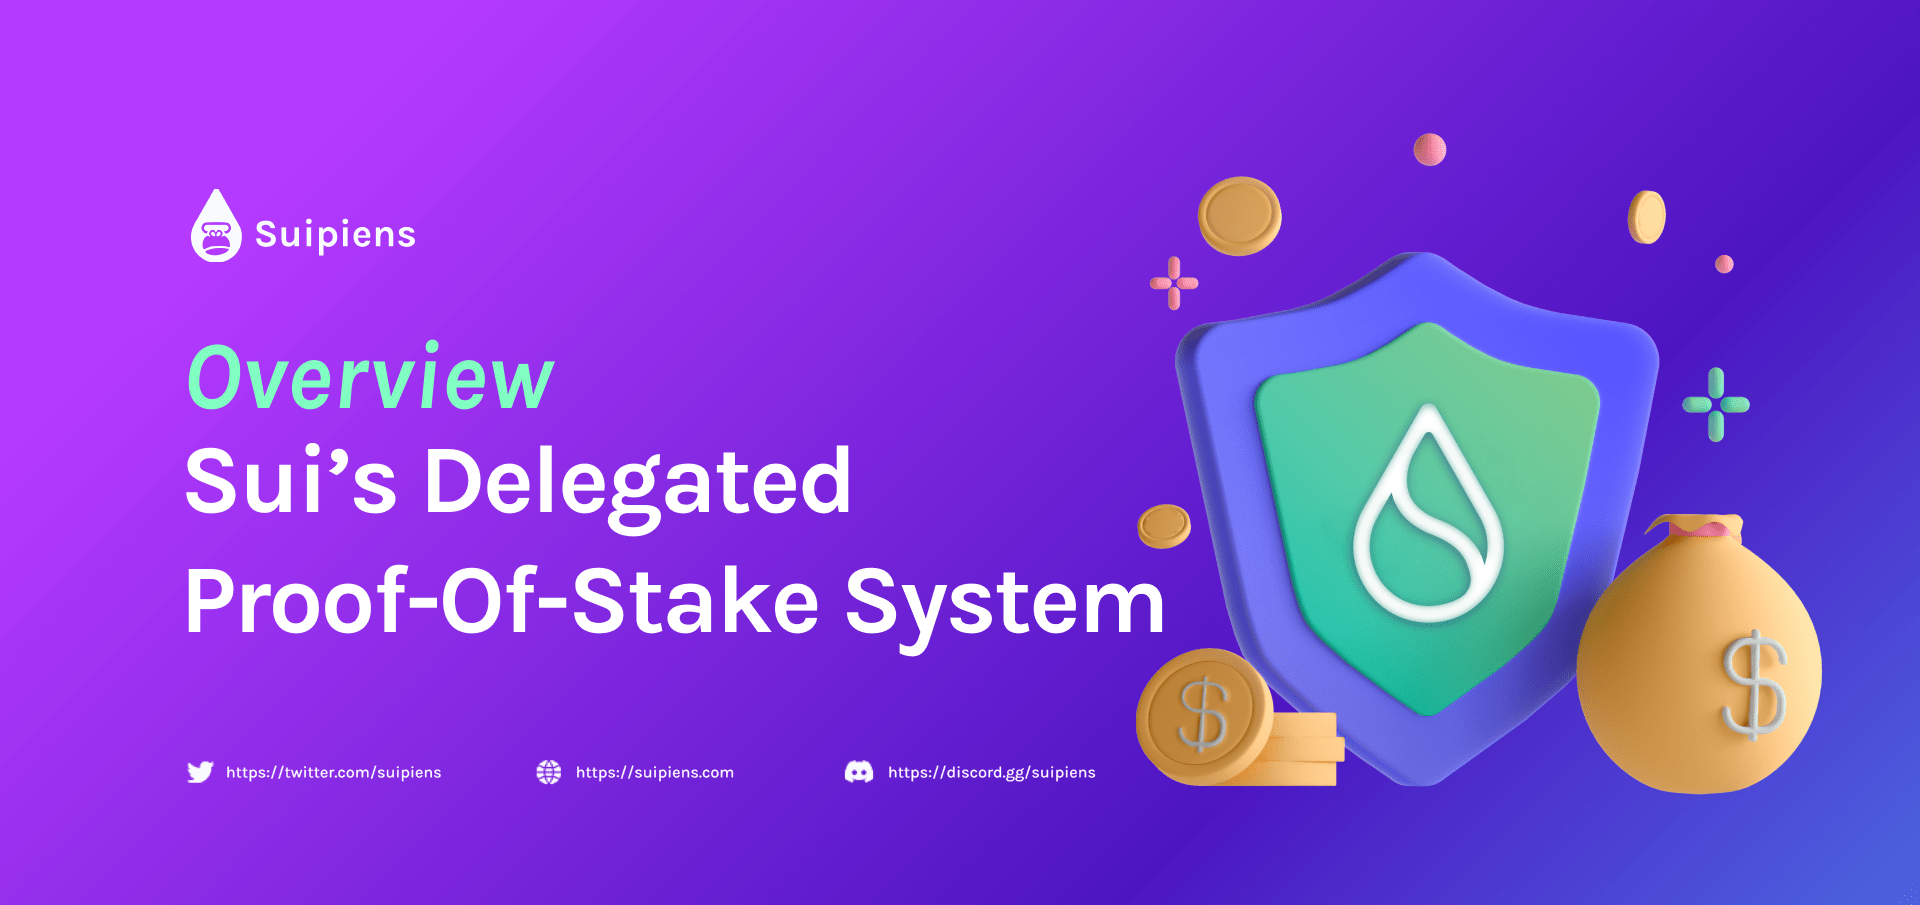 Overview: Sui’s Delegated Proof-of-Stake System